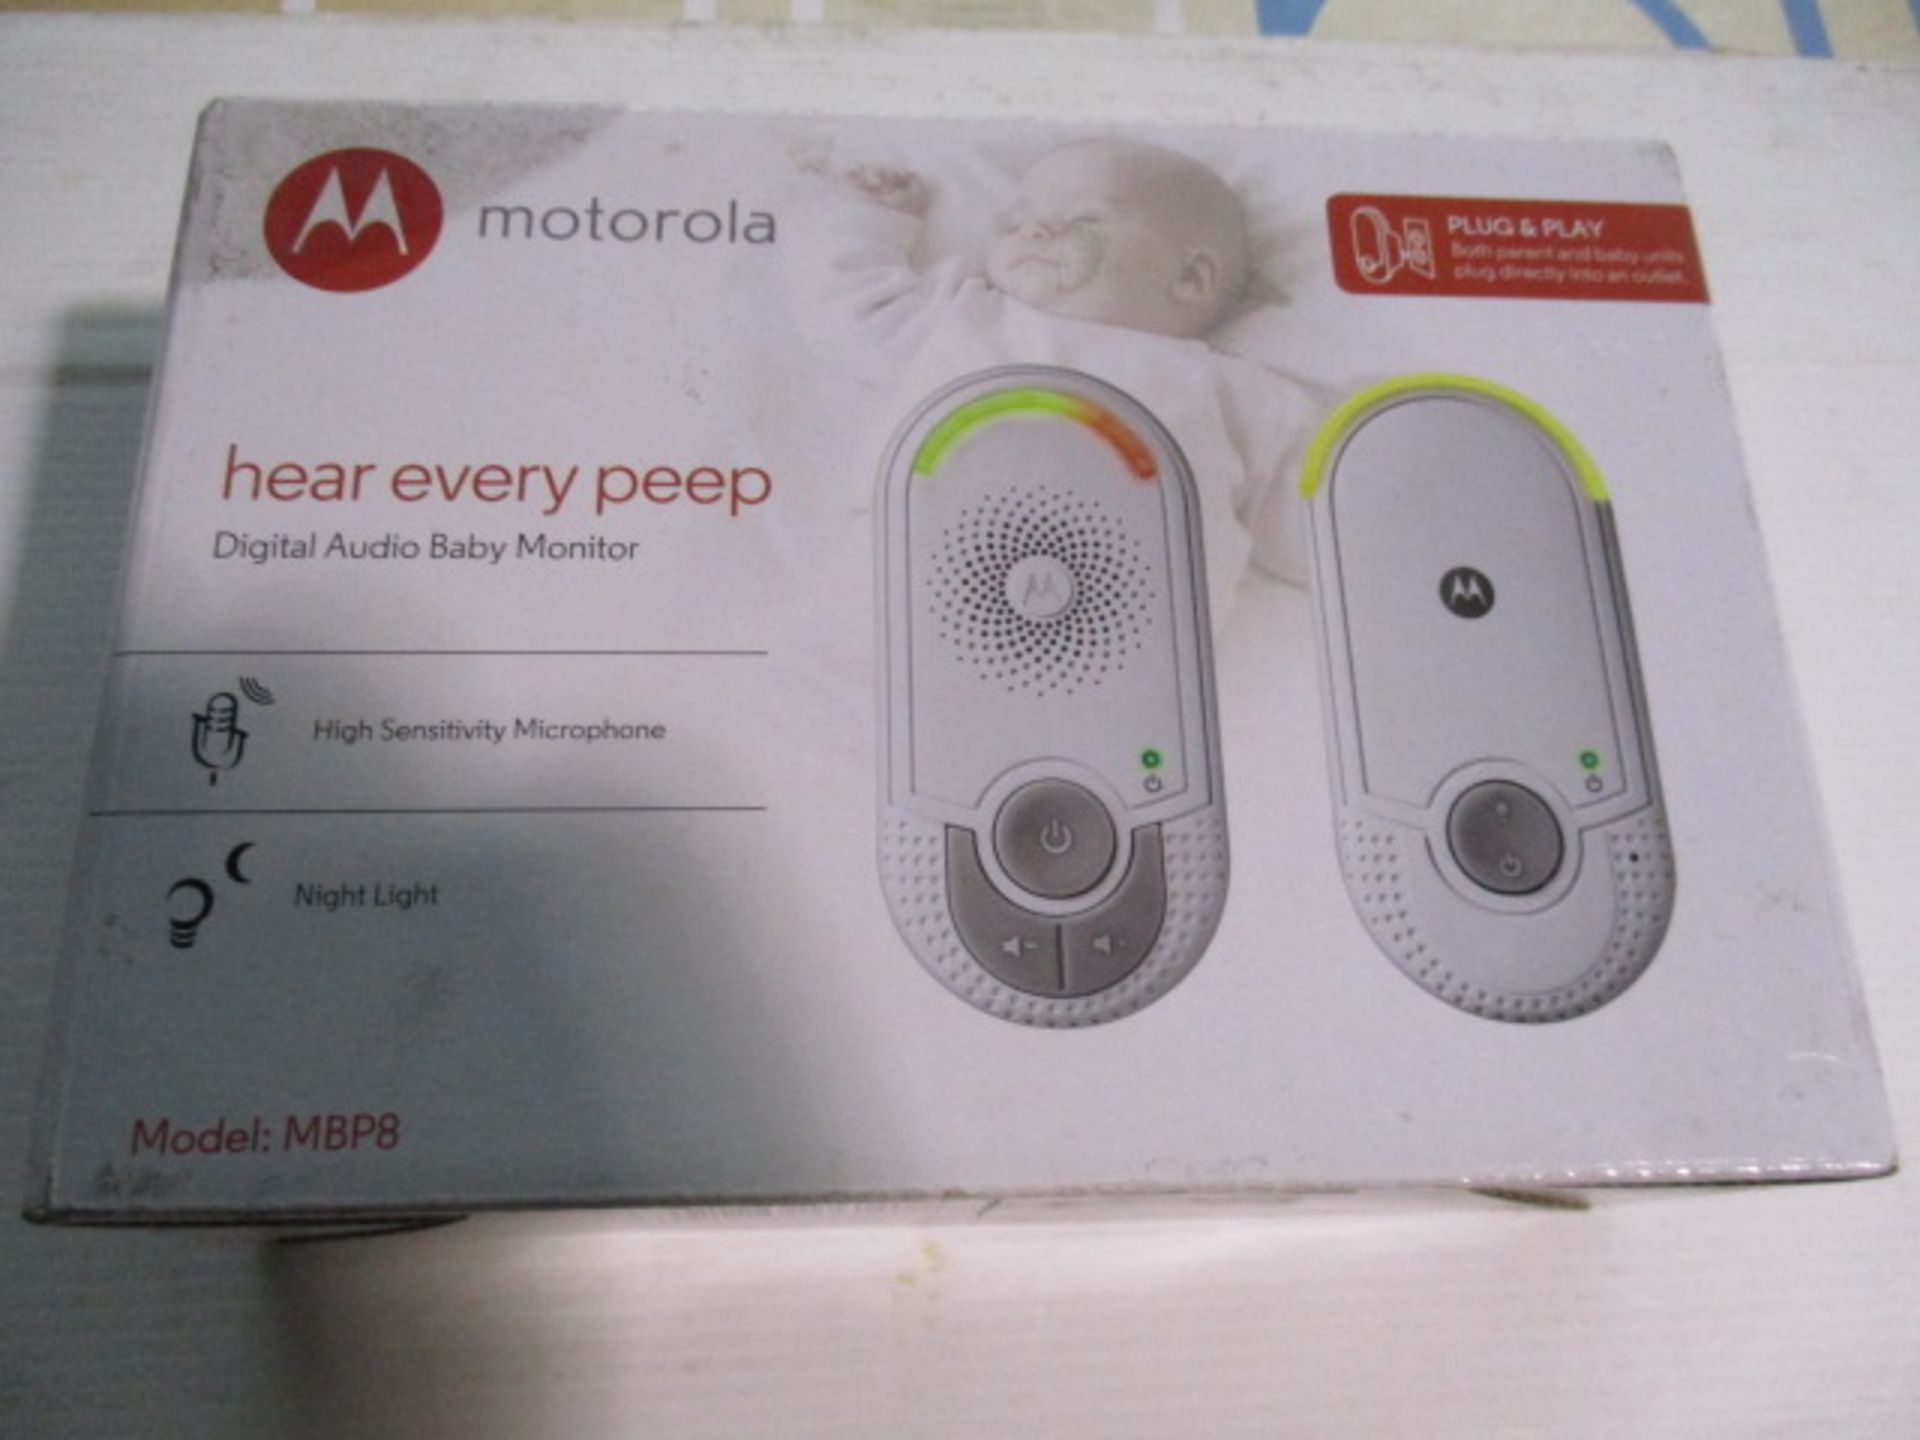 Motorola digital baby monitor system boxed and unchecked